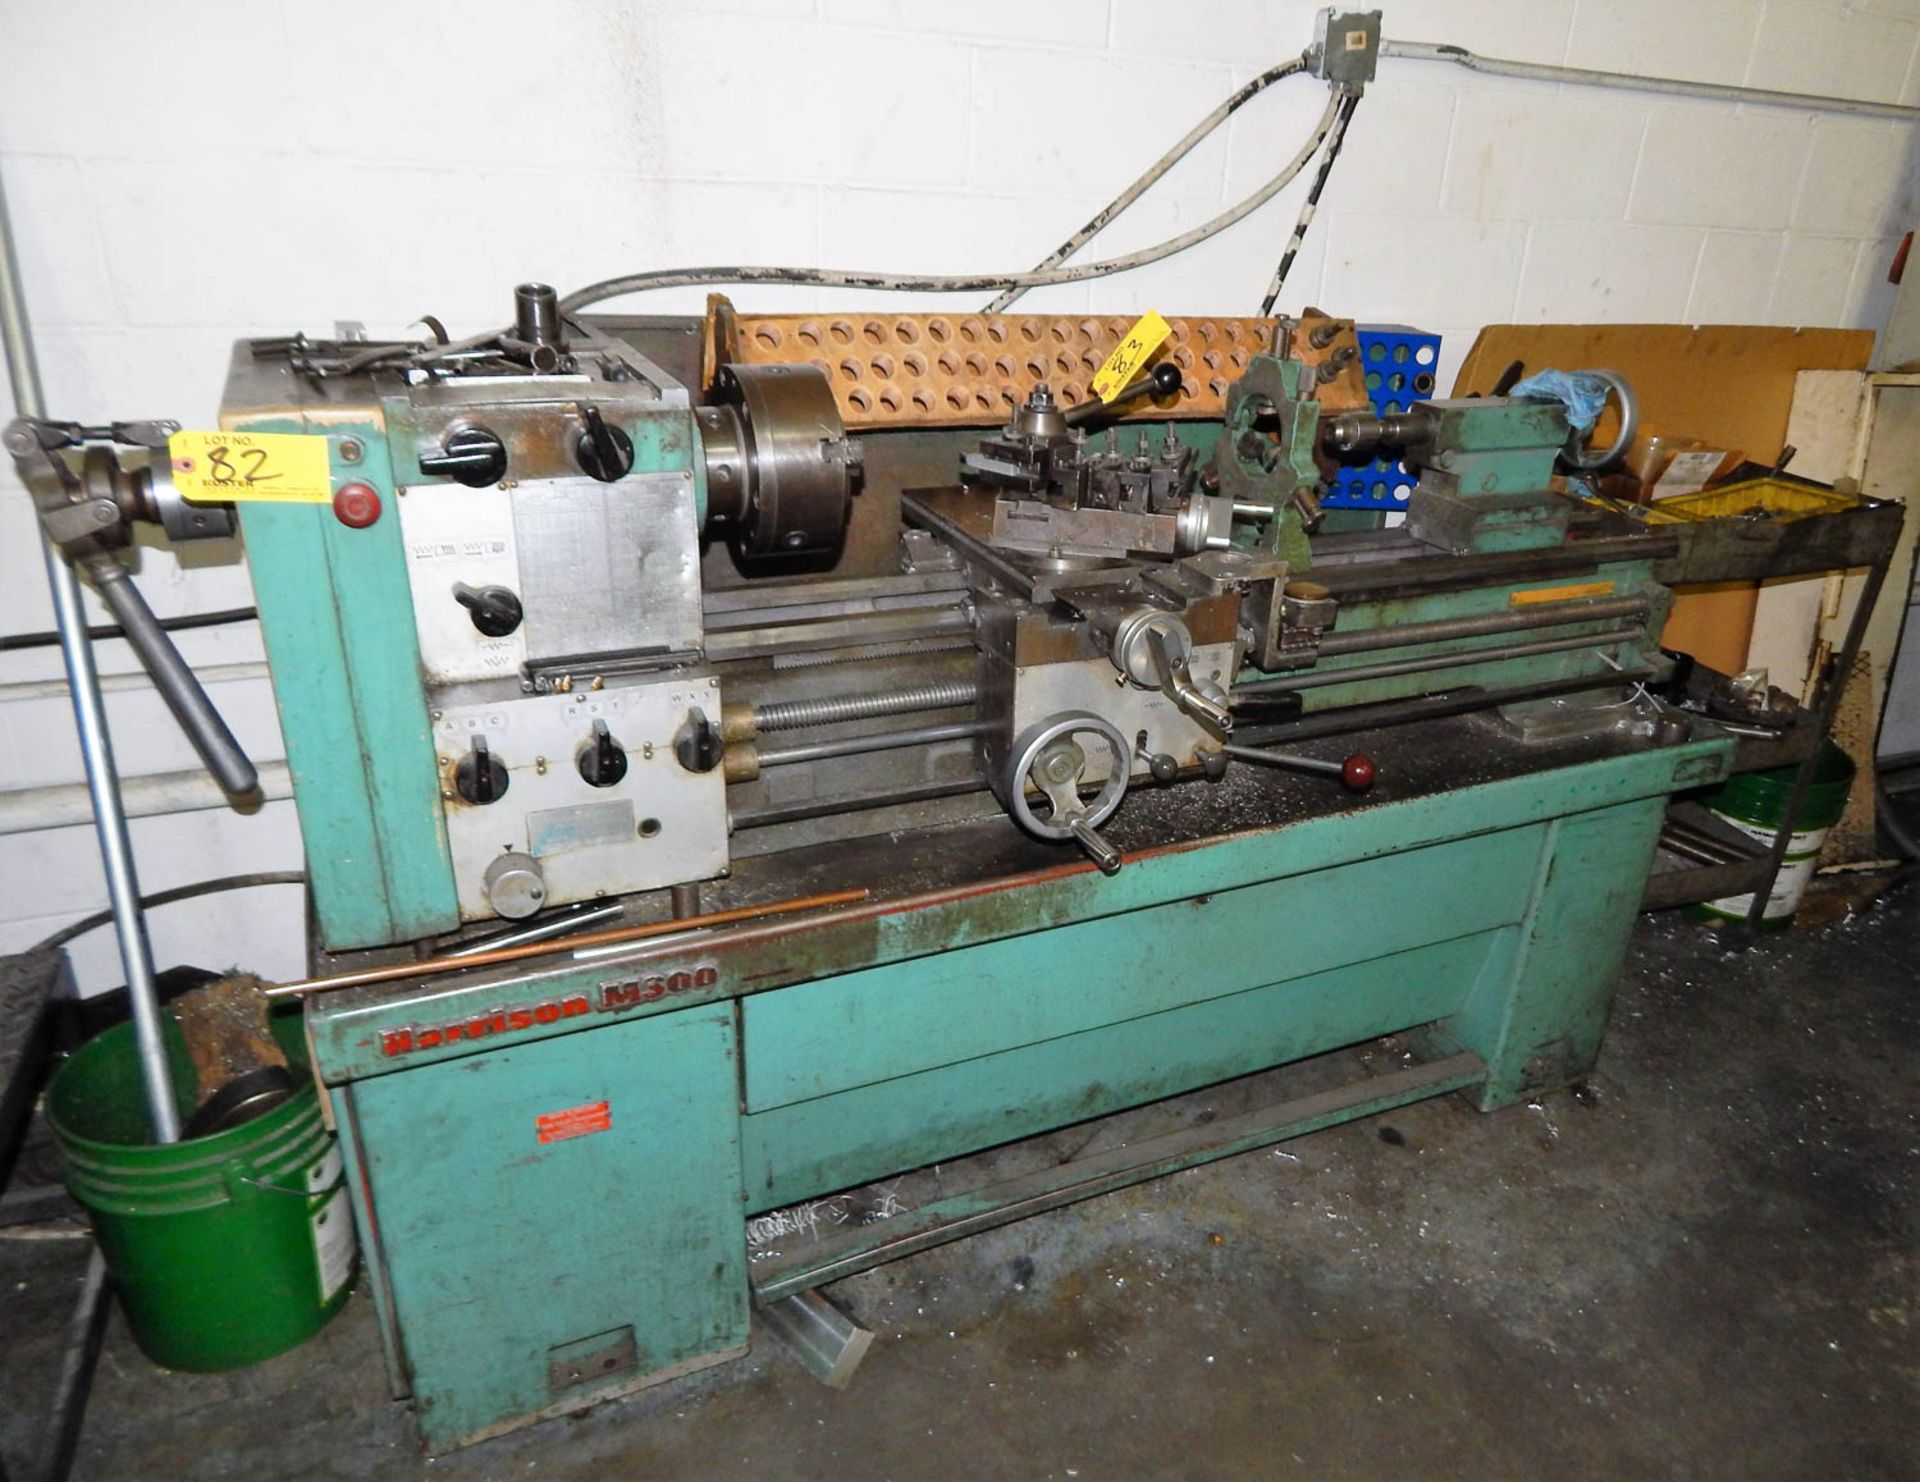 HARRISON MDL. M-300 14'' X 36'' LATHE, WITH STEADY REST, TAILSTOCK, DRAW BAR, 8'' 3-JAW CHUCK, 1.5''